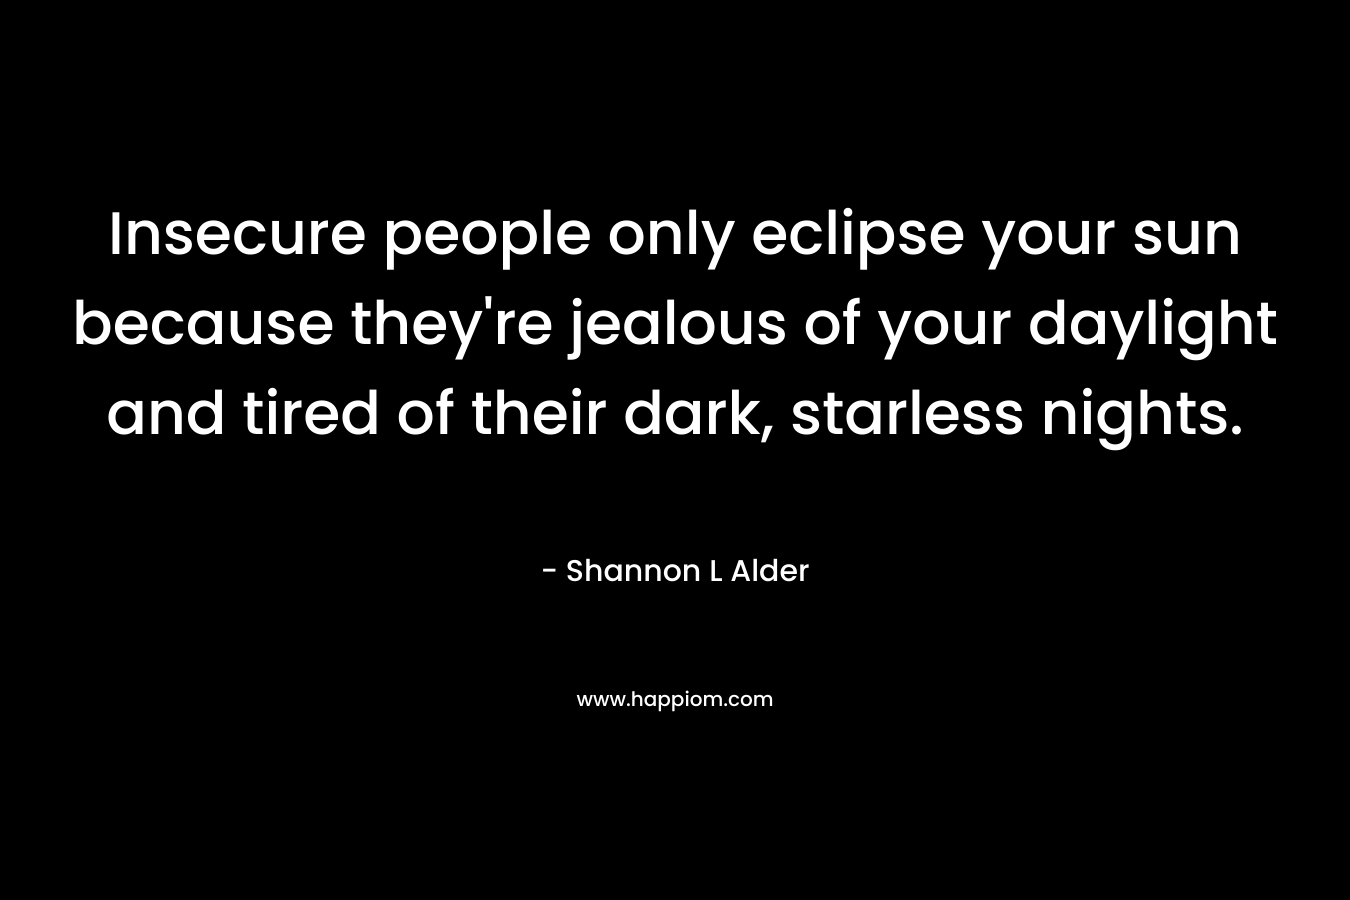 Insecure people only eclipse your sun because they’re jealous of your daylight and tired of their dark, starless nights. – Shannon L Alder